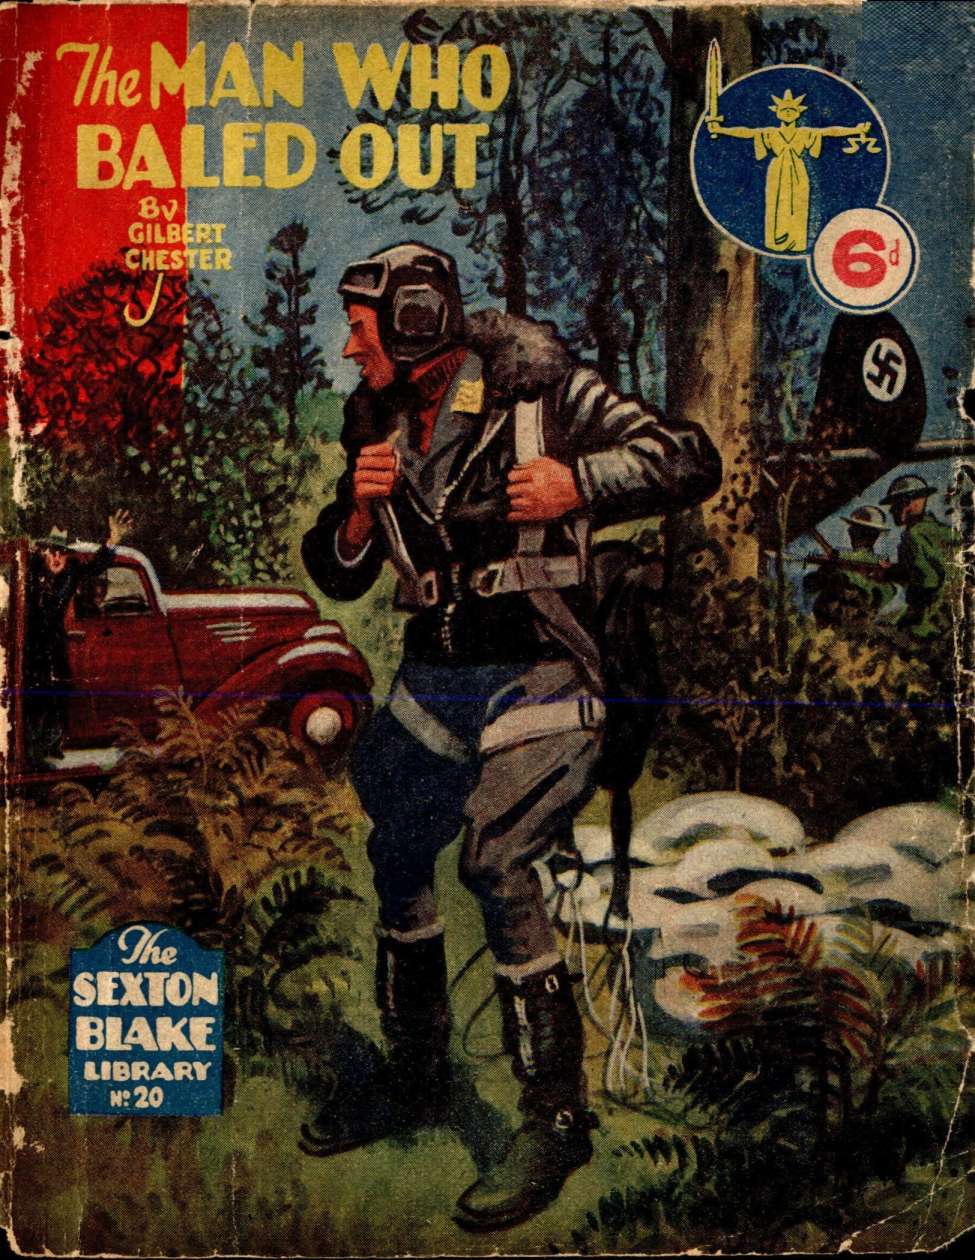 Comic Book Cover For Sexton Blake Library S3 20 - The Man Who Baled Out